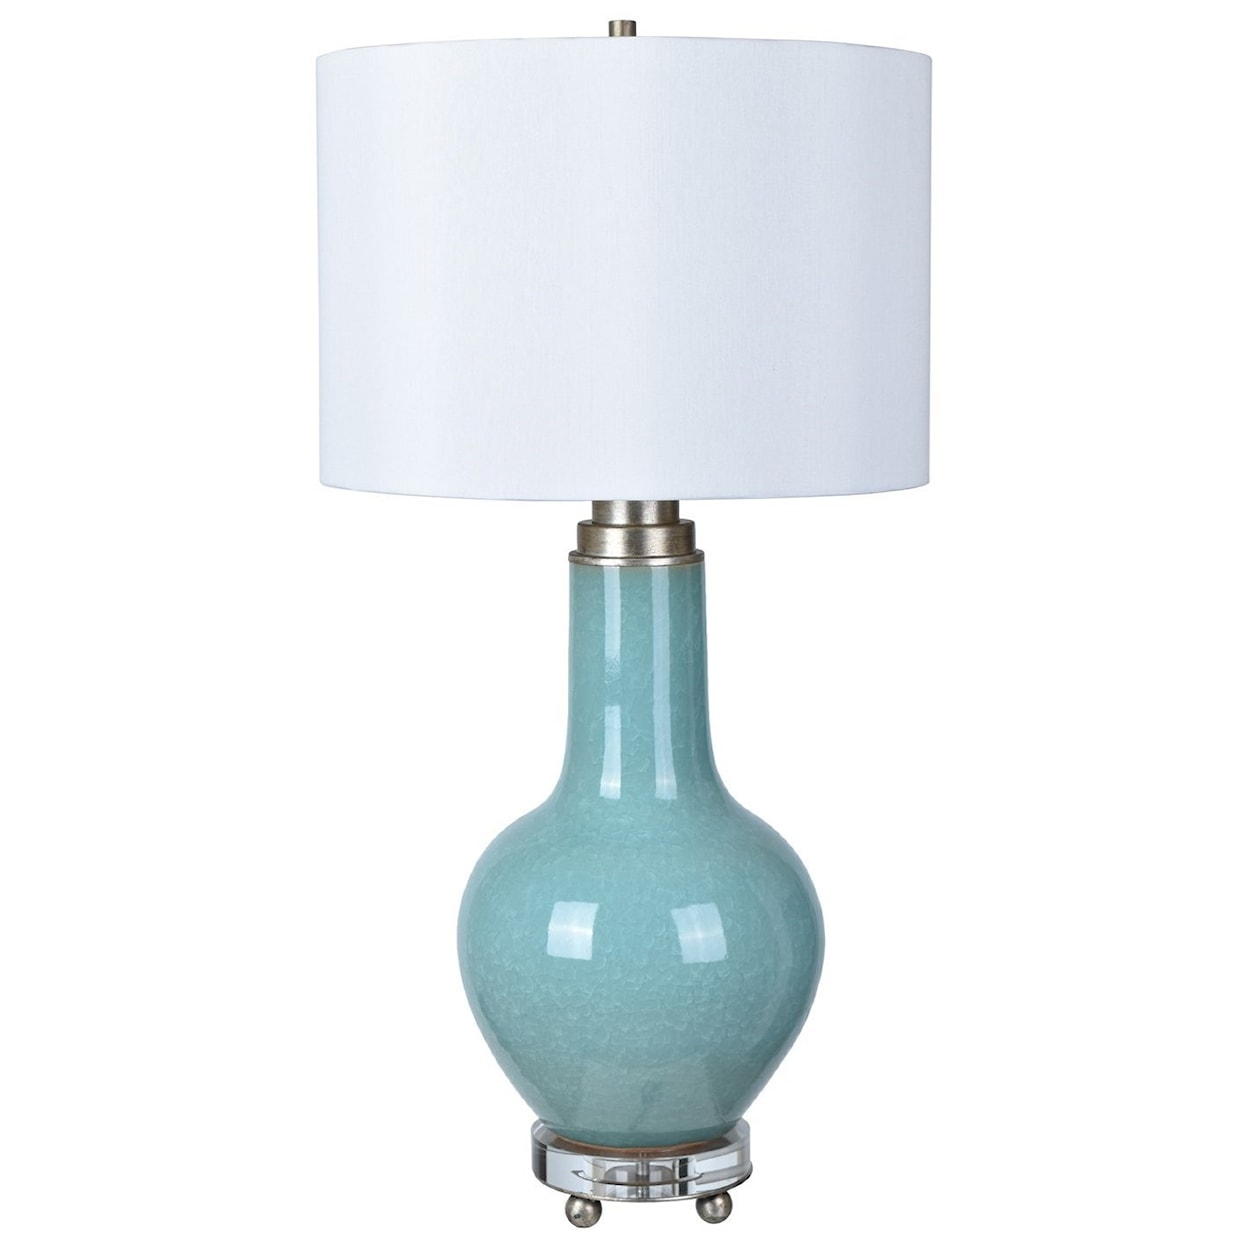 Crestview Collection Lighting Penta Table Lamp